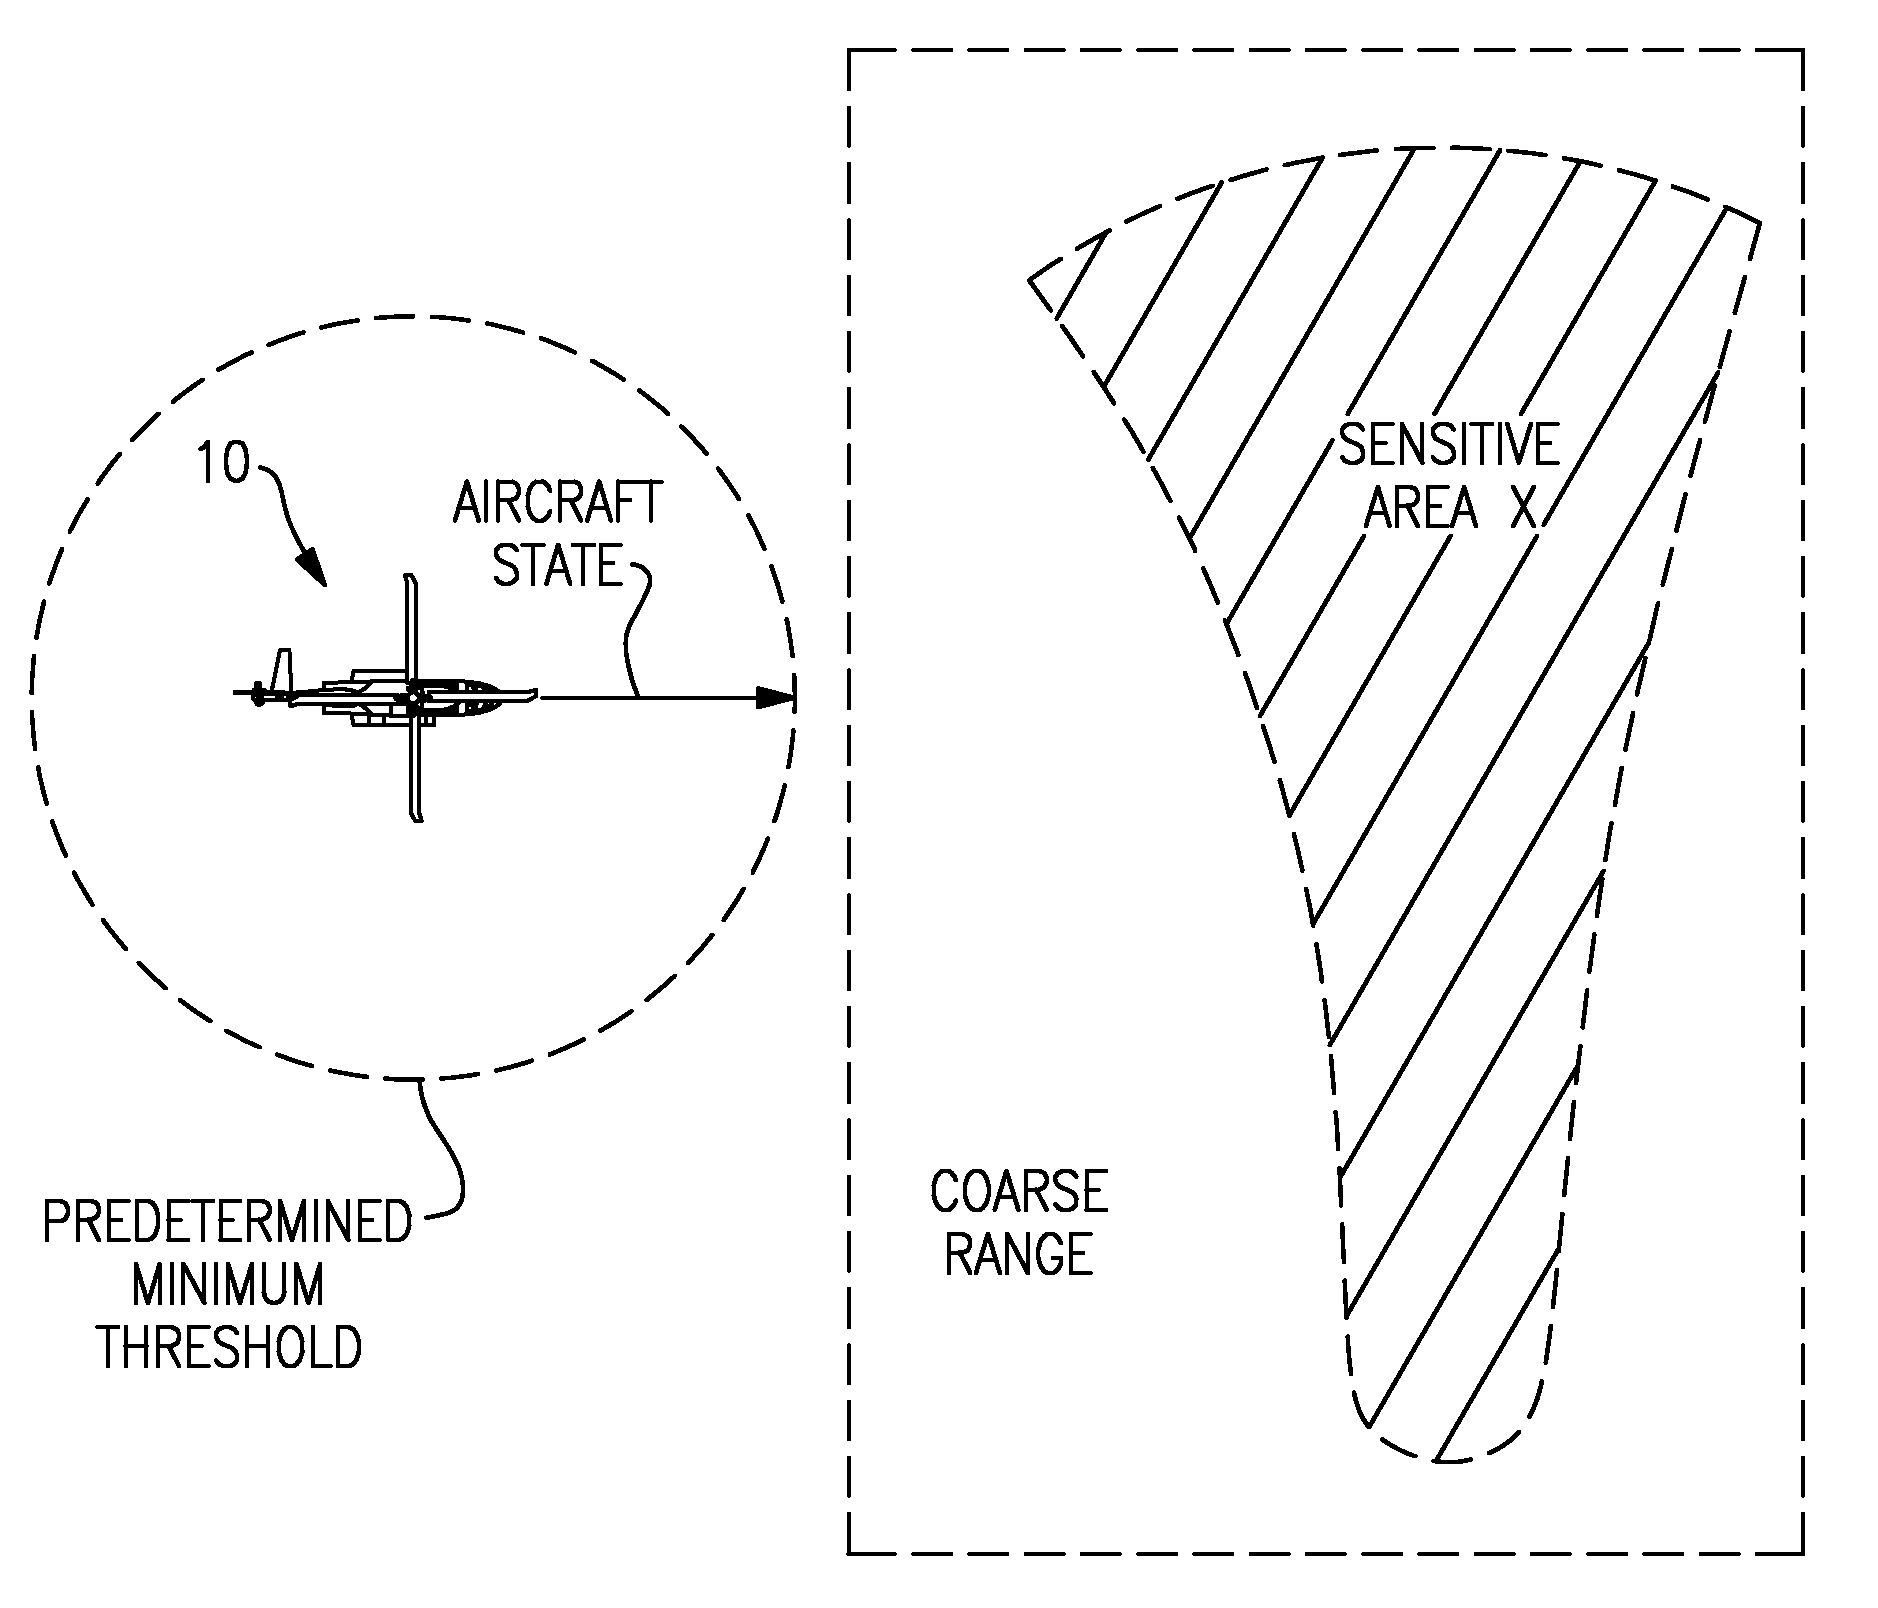 Rotary wing aircraft proximity warning system with a geographically based avoidance system